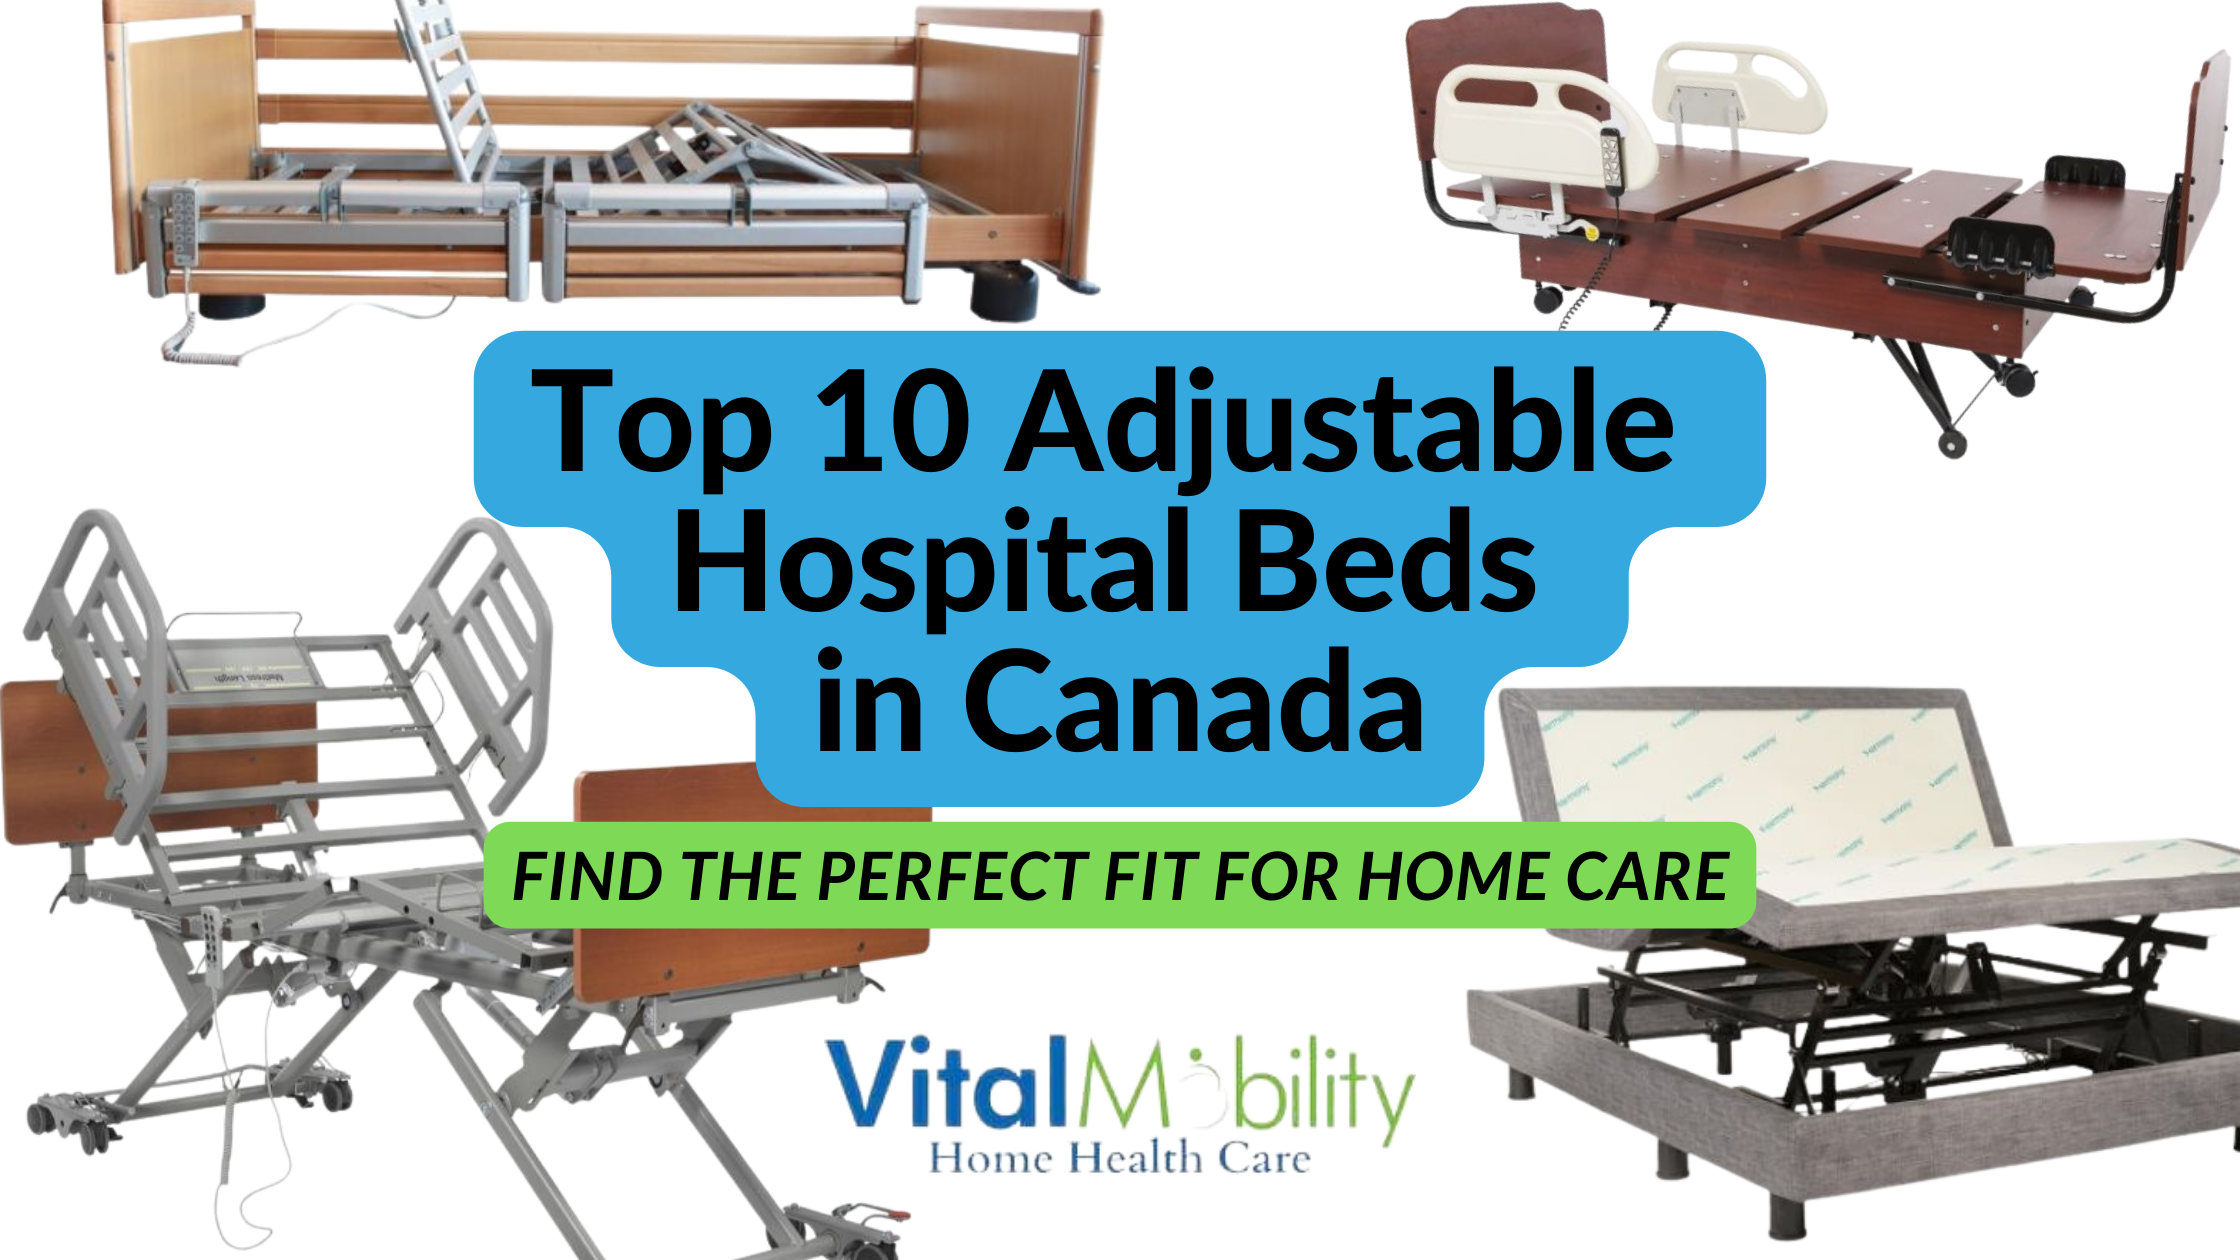 Top 10 Adjustable Hospital Beds in Canada: Find the Perfect Fit